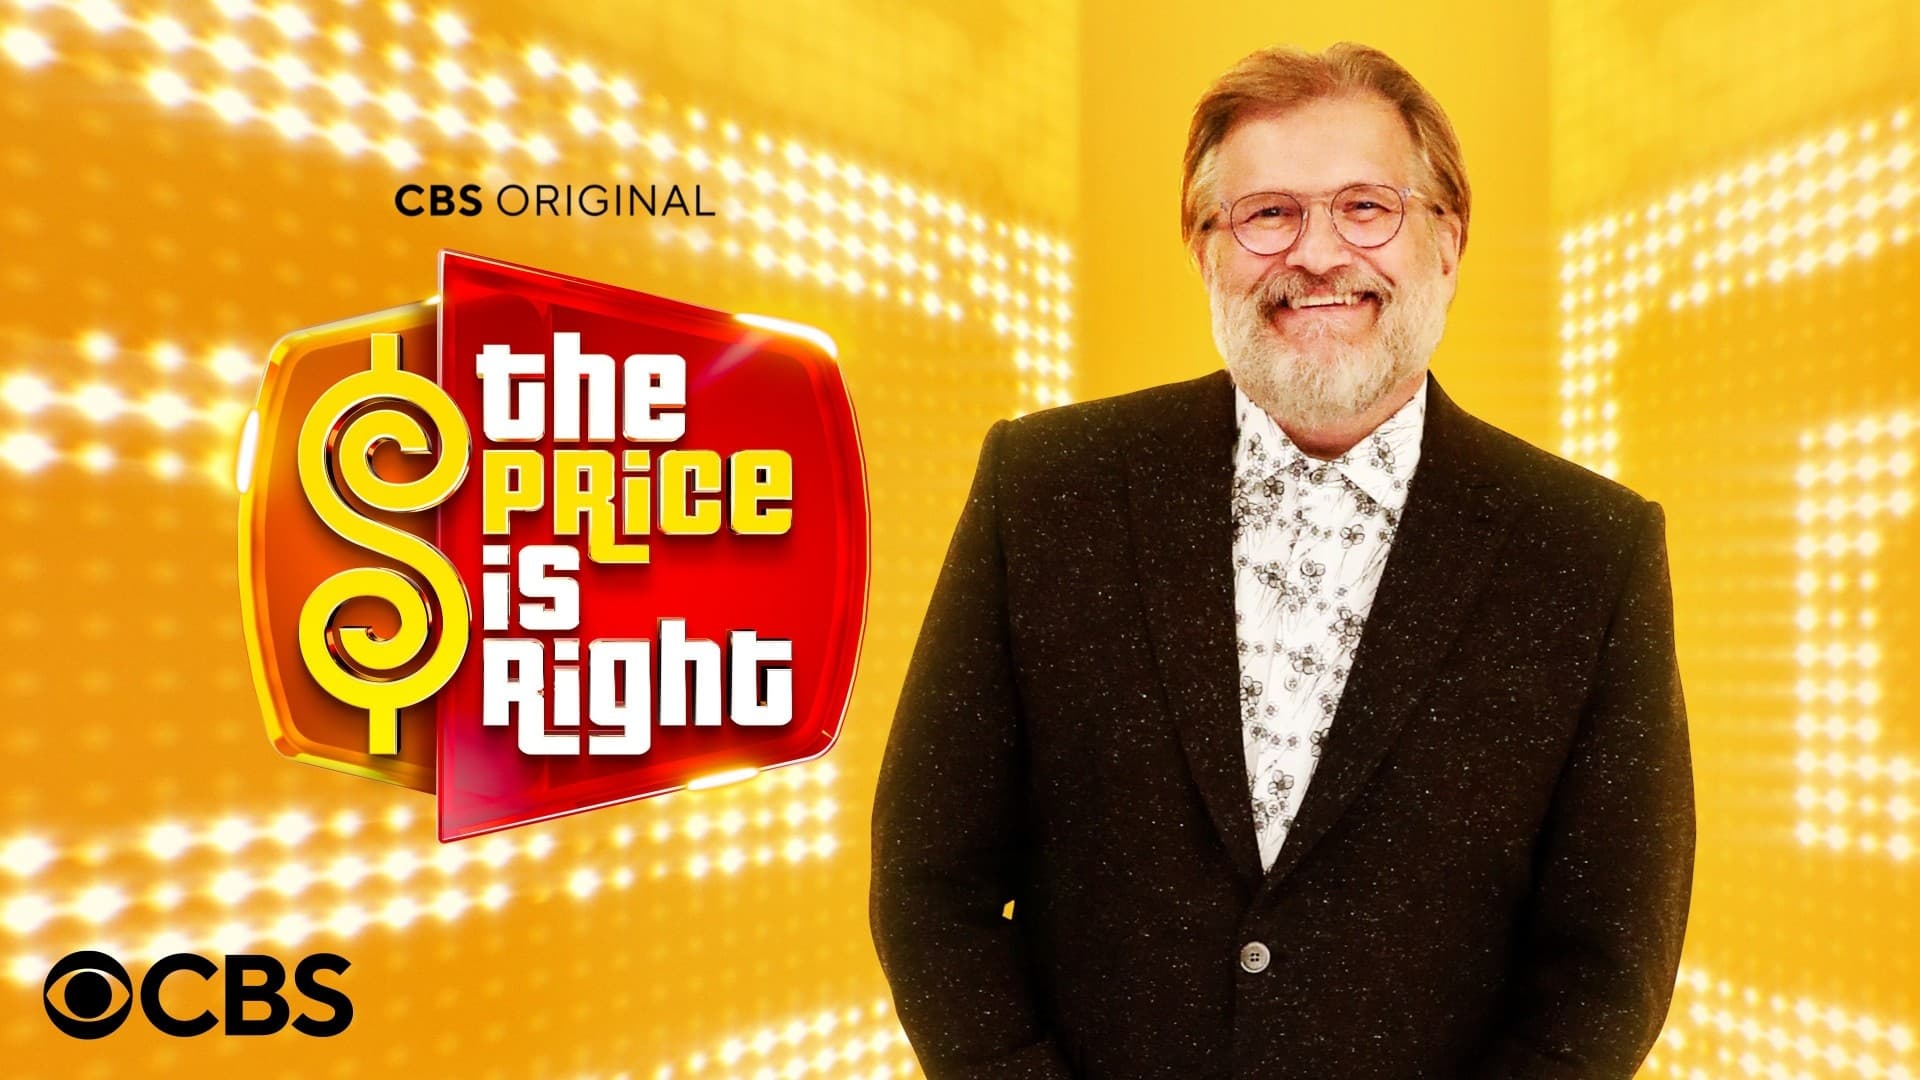 The Price Is Right - Season 1 Episode 81 : The Price Is Right Season 1 Episode 81